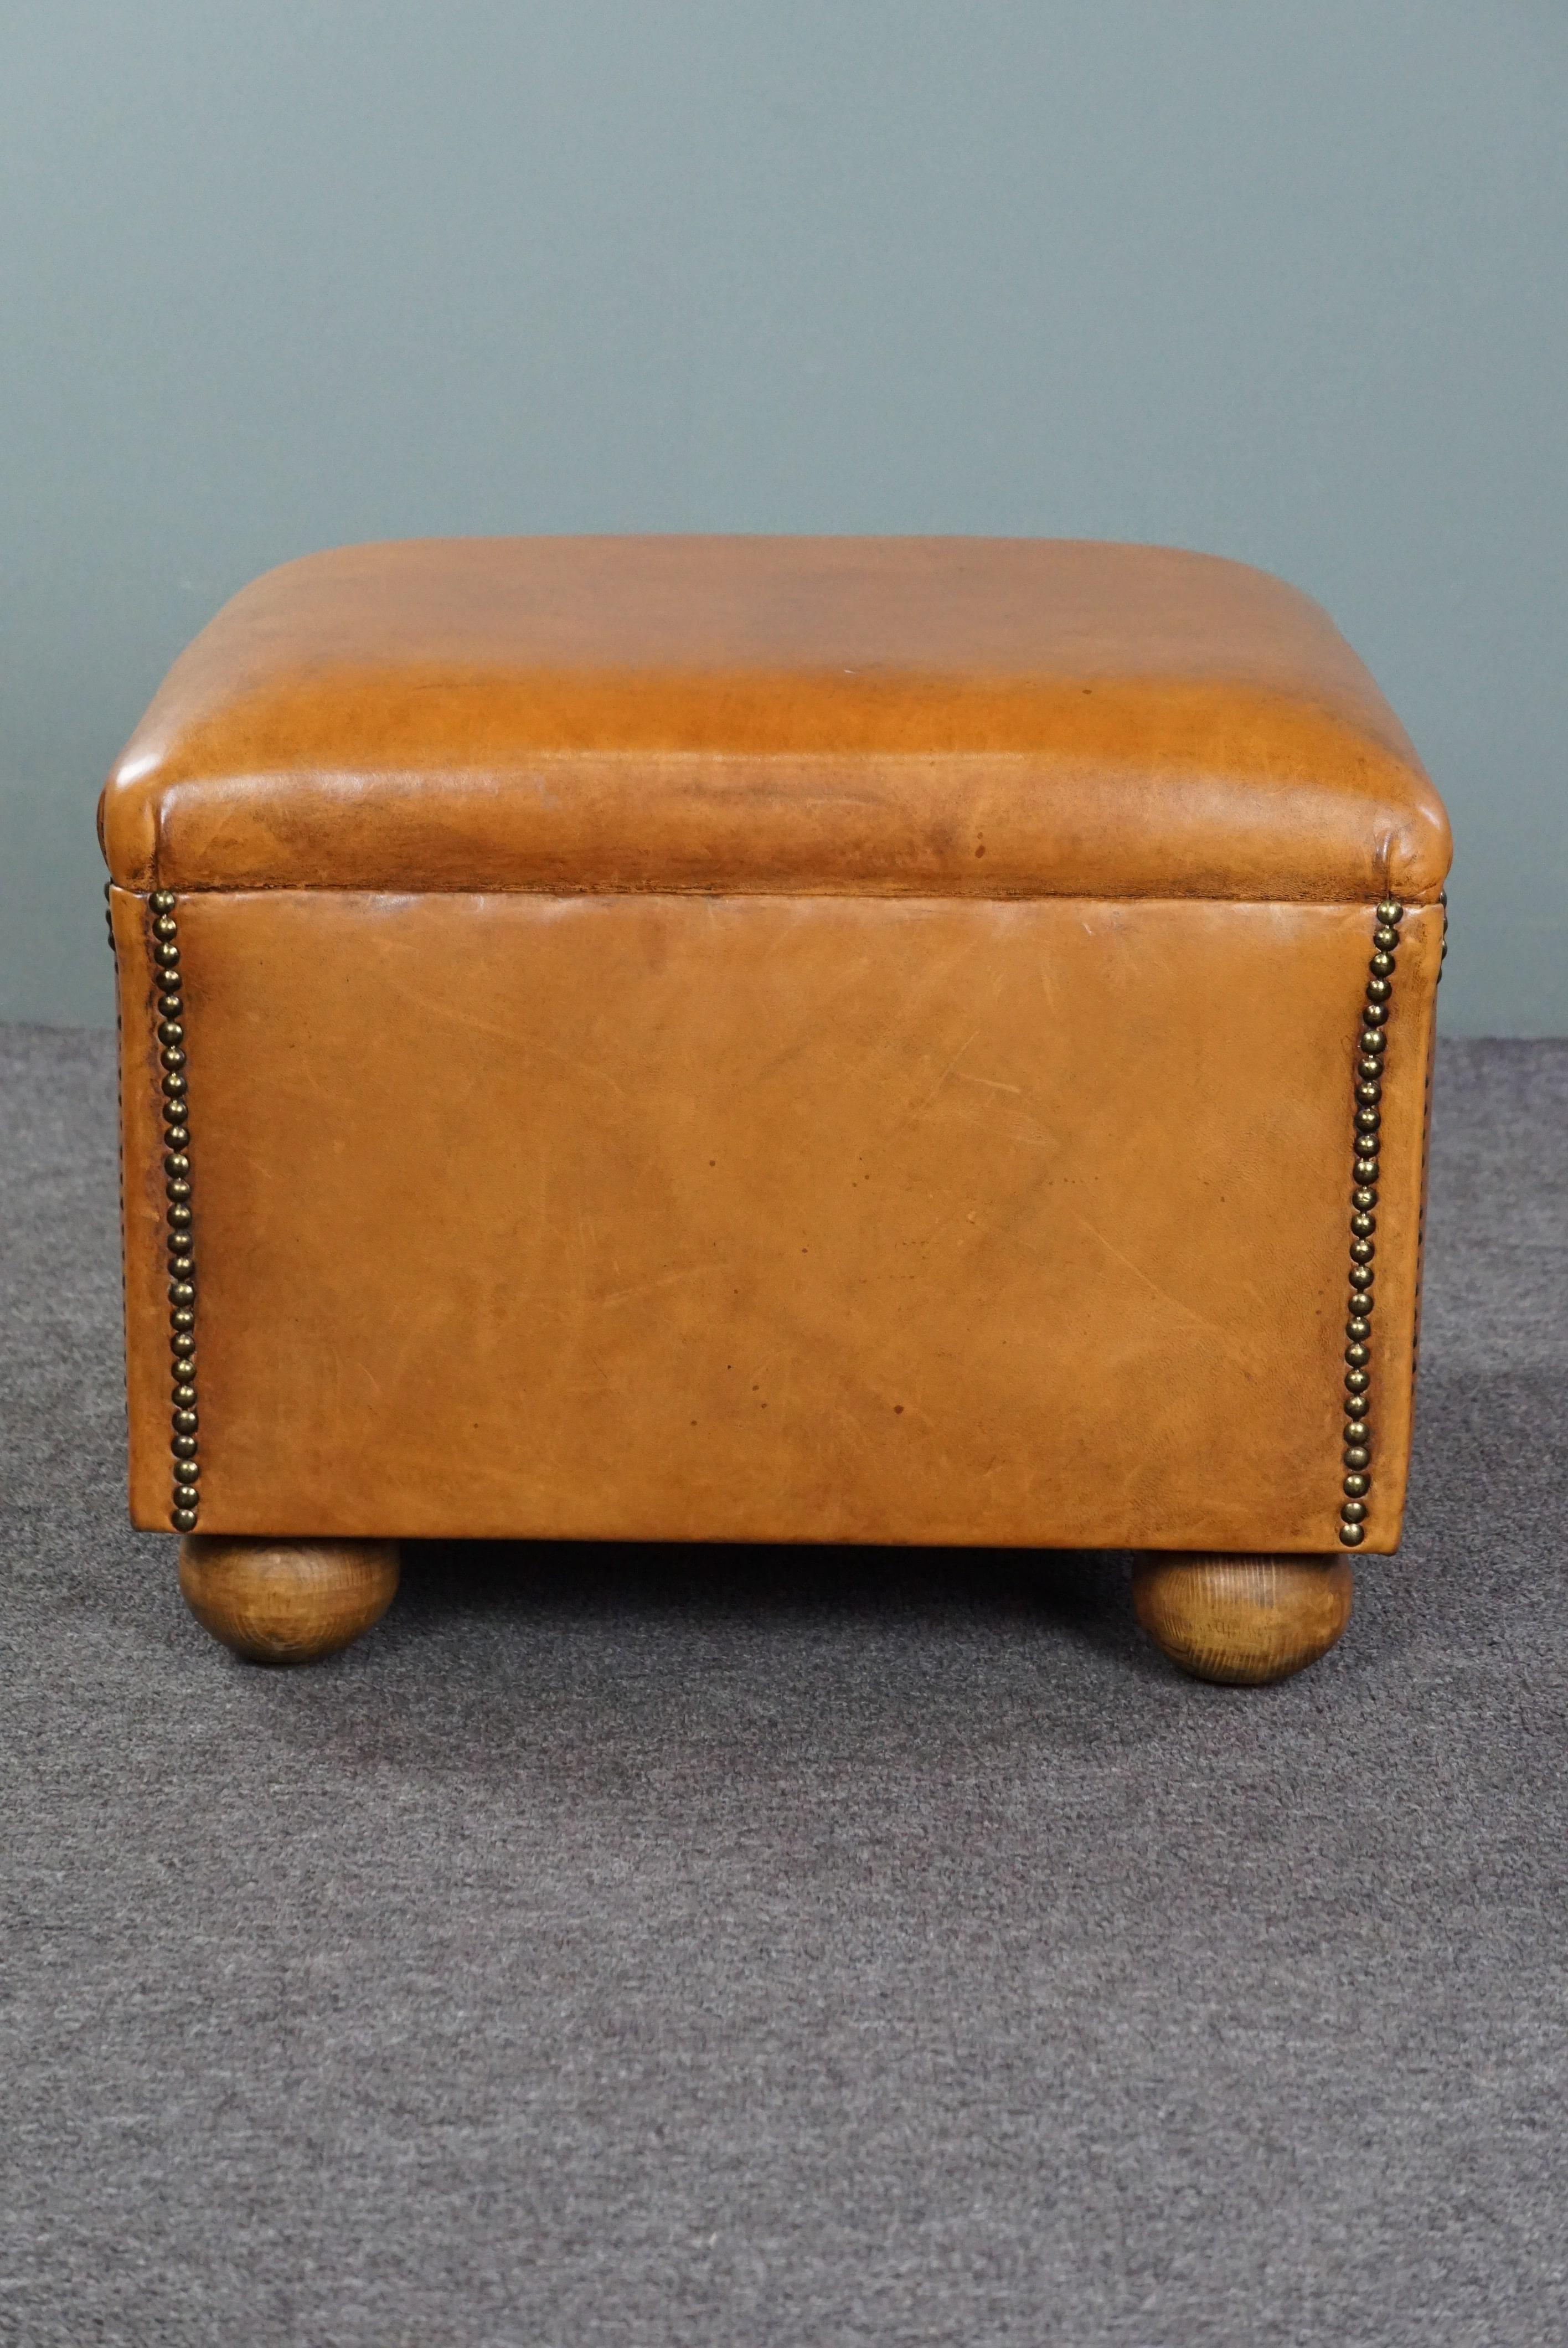 Offered is this beautiful sheep leather ottoman with spherical legs. A sheep leather footstool, also known as an ottoman, transforms your already comfortable armchair into a true relaxation paradise. Resting your feet on this ottoman allows you to